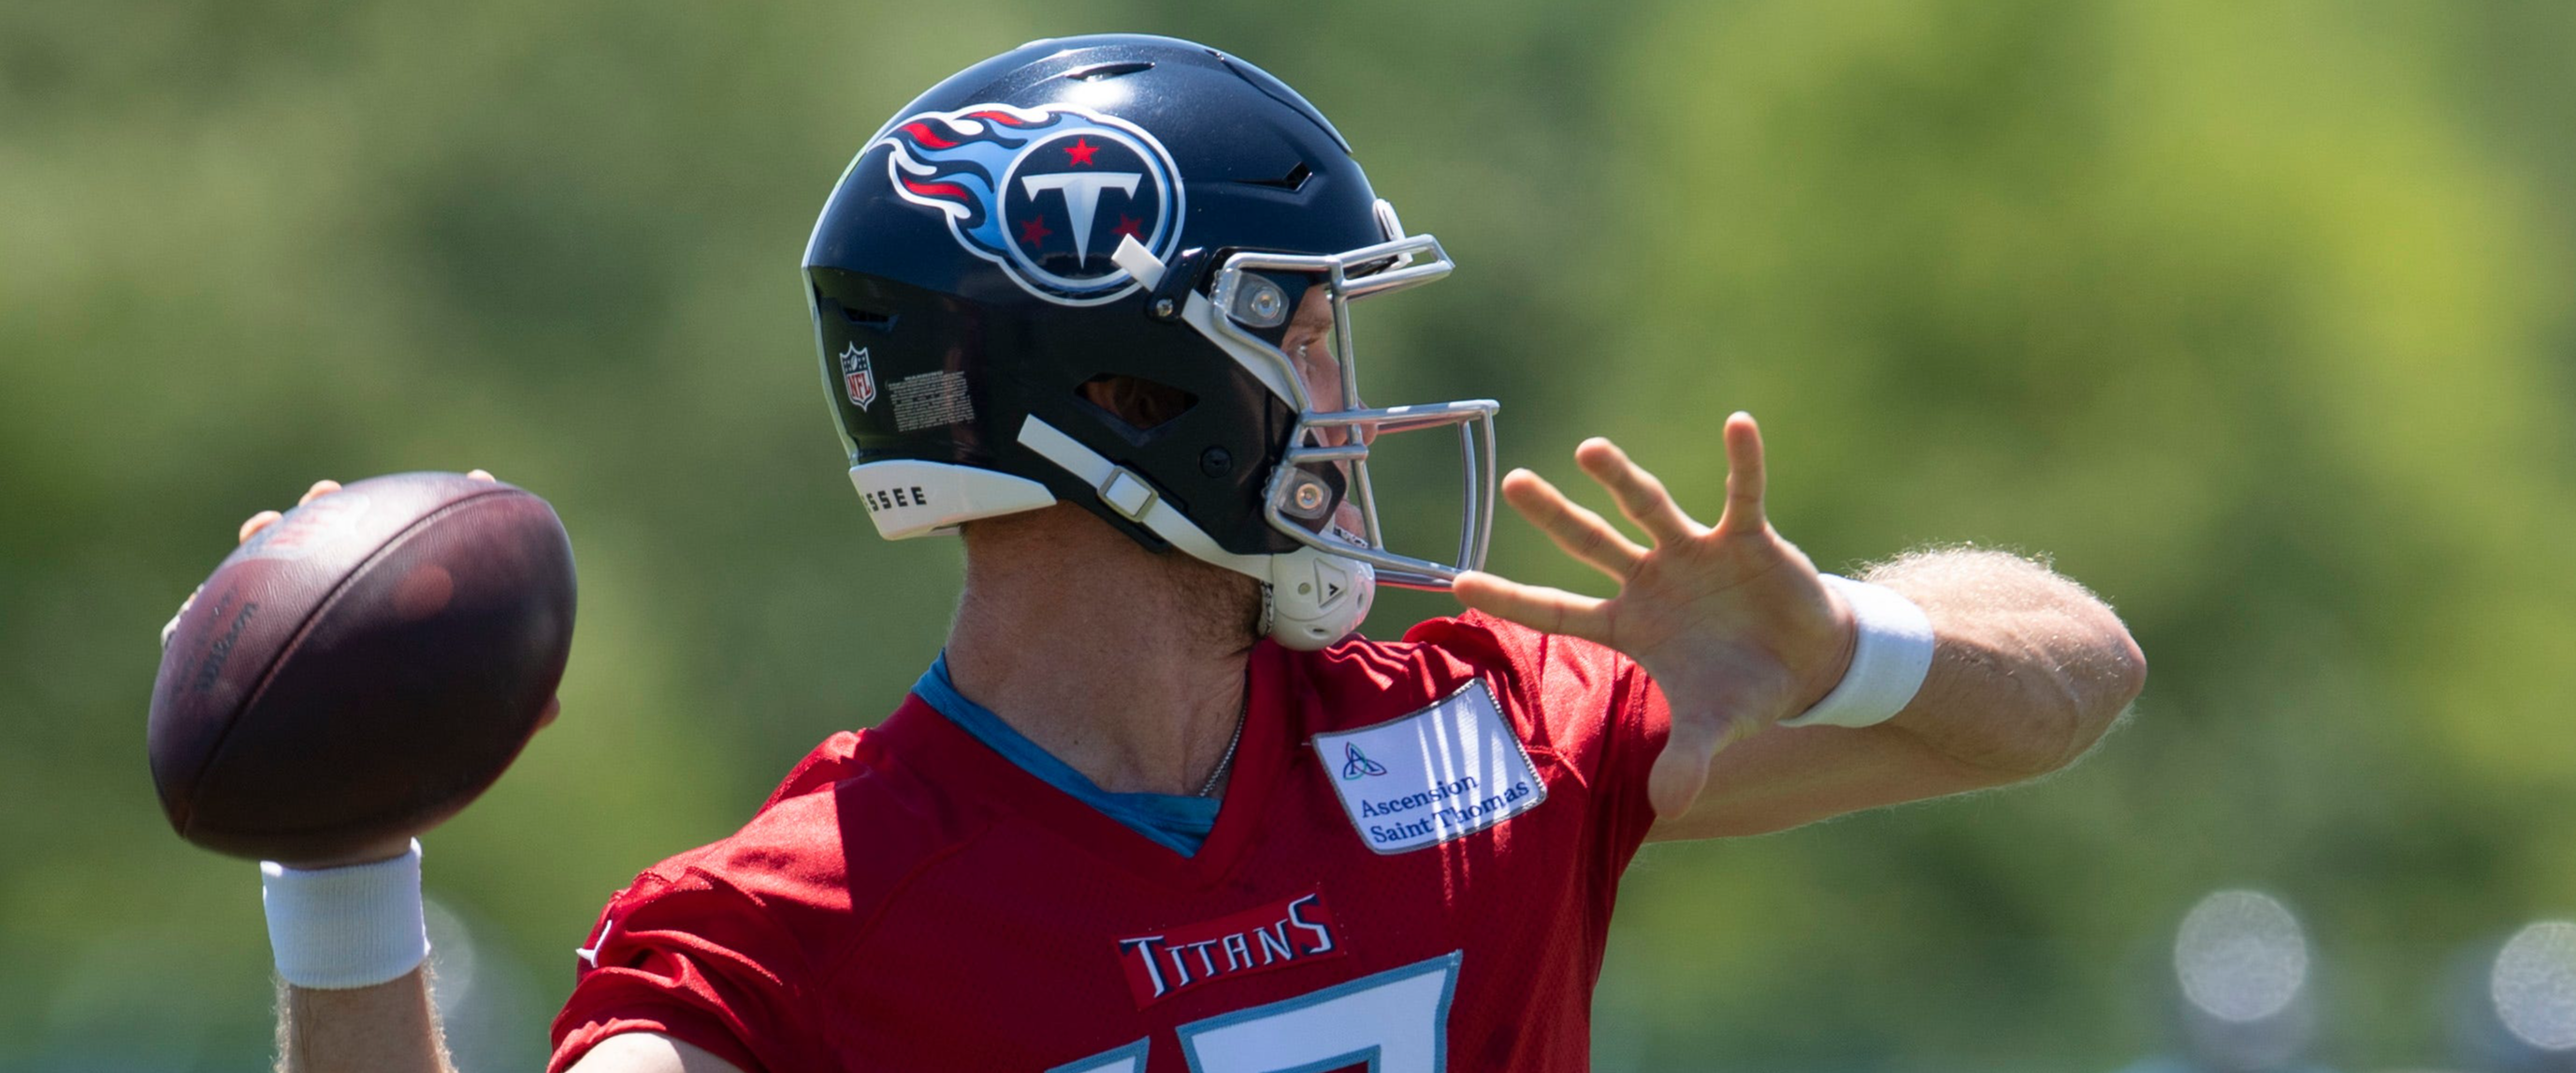 Titans: My thoughts on ESPN's quarterback rankings